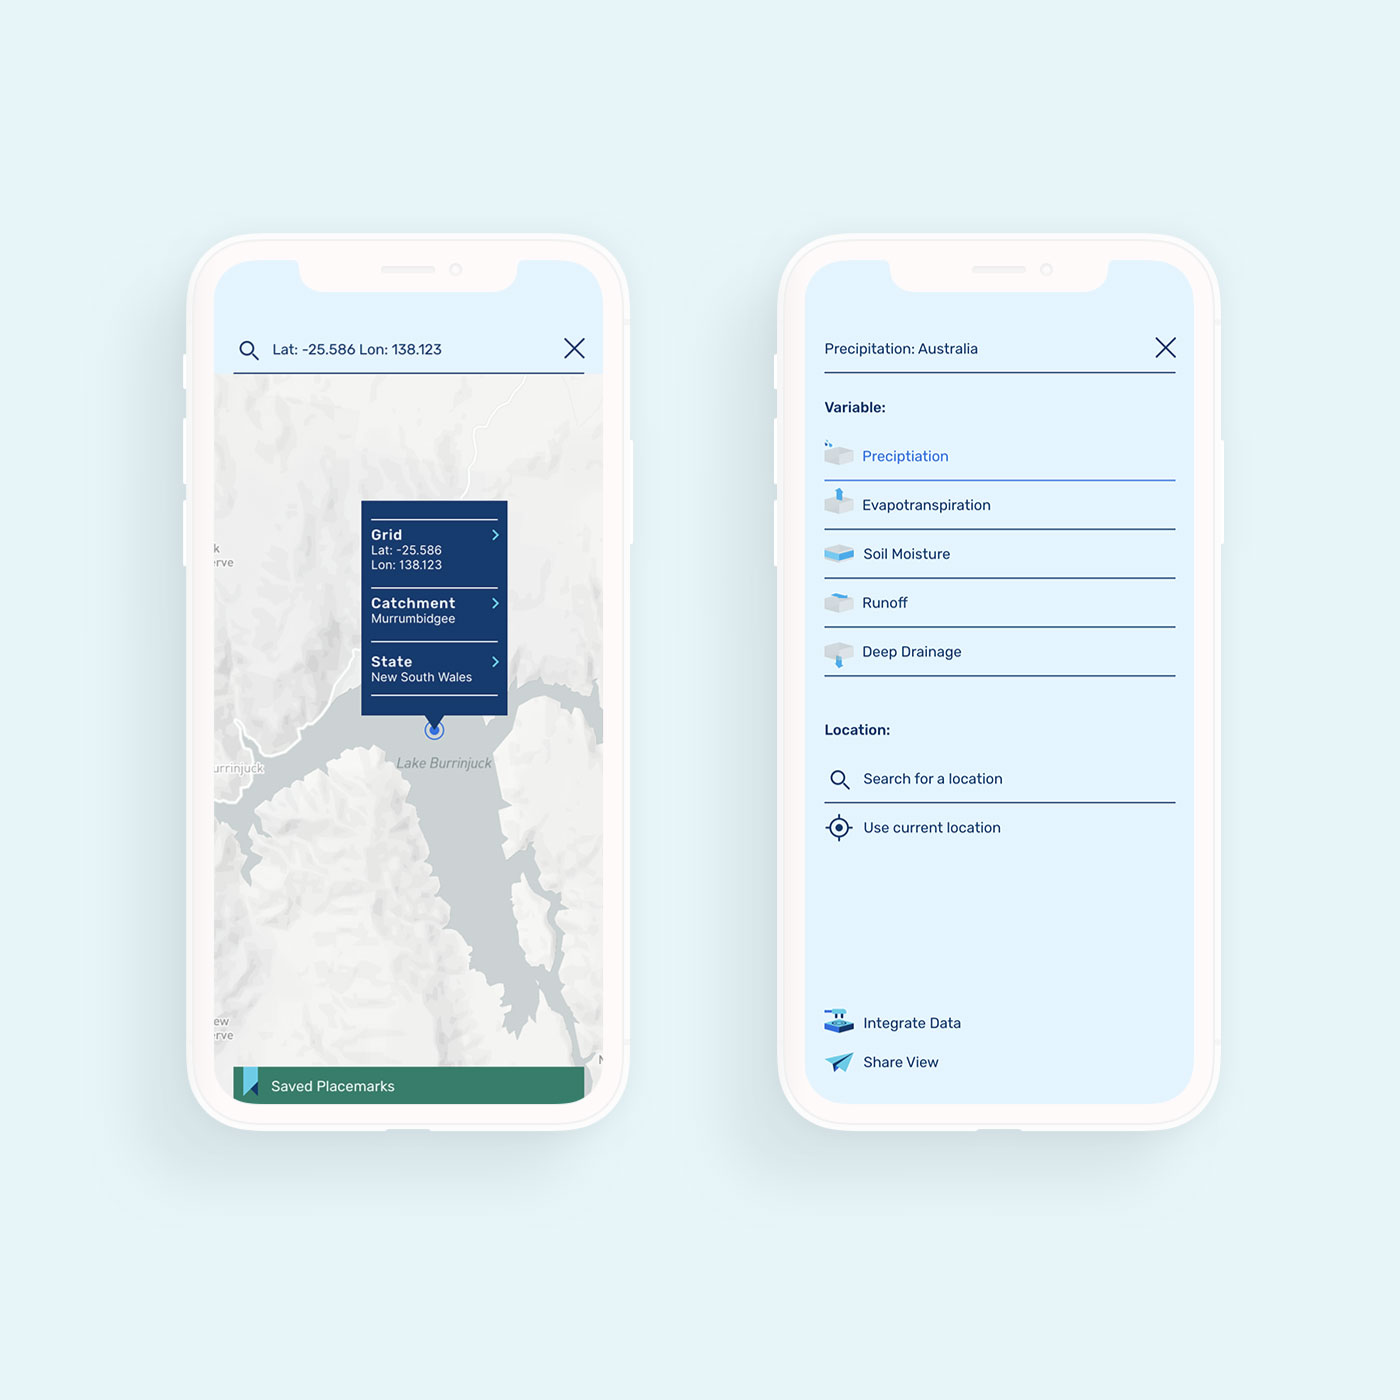 An image showing how the navigation works on mobile devices. Highlighting how you can choose your location and data set that you want to look at.